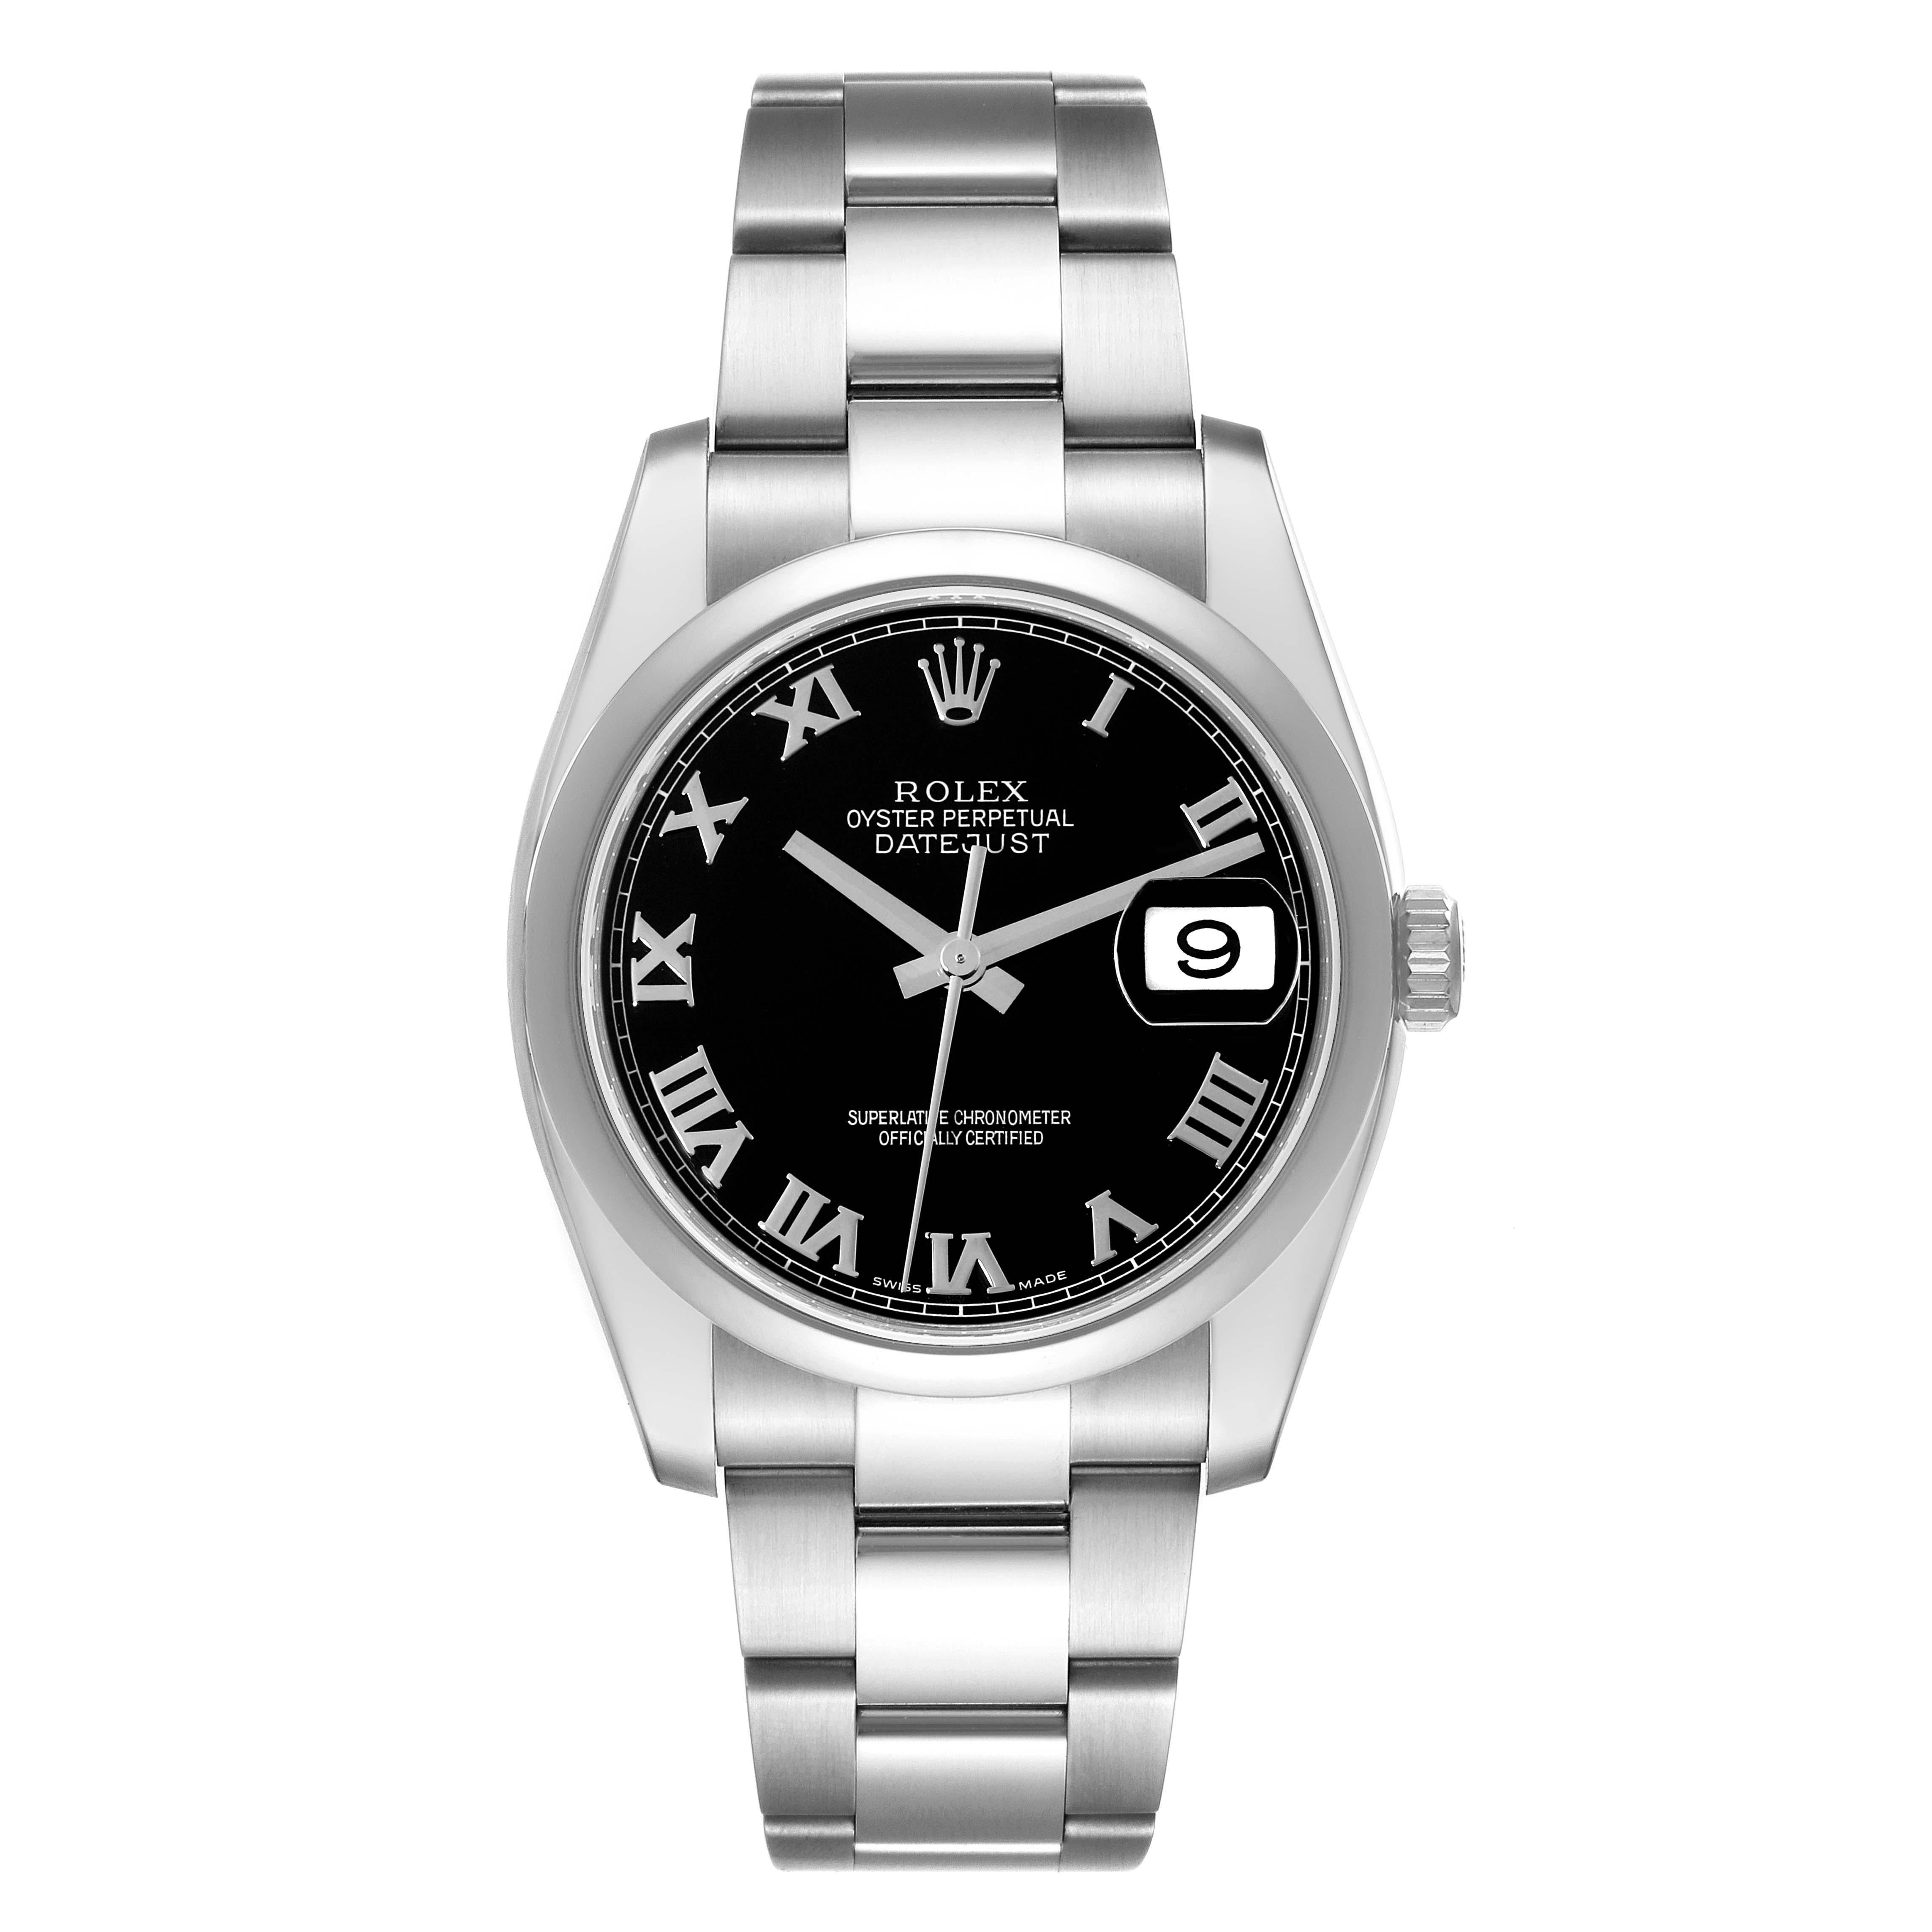 Rolex Datejust Black Roman Dial Steel Mens Watch 116200. Officially certified chronometer automatic self-winding movement with quickset date. Stainless steel case 36.0 mm in diameter. High polished lugs. Rolex logo on the crown. Stainless steel